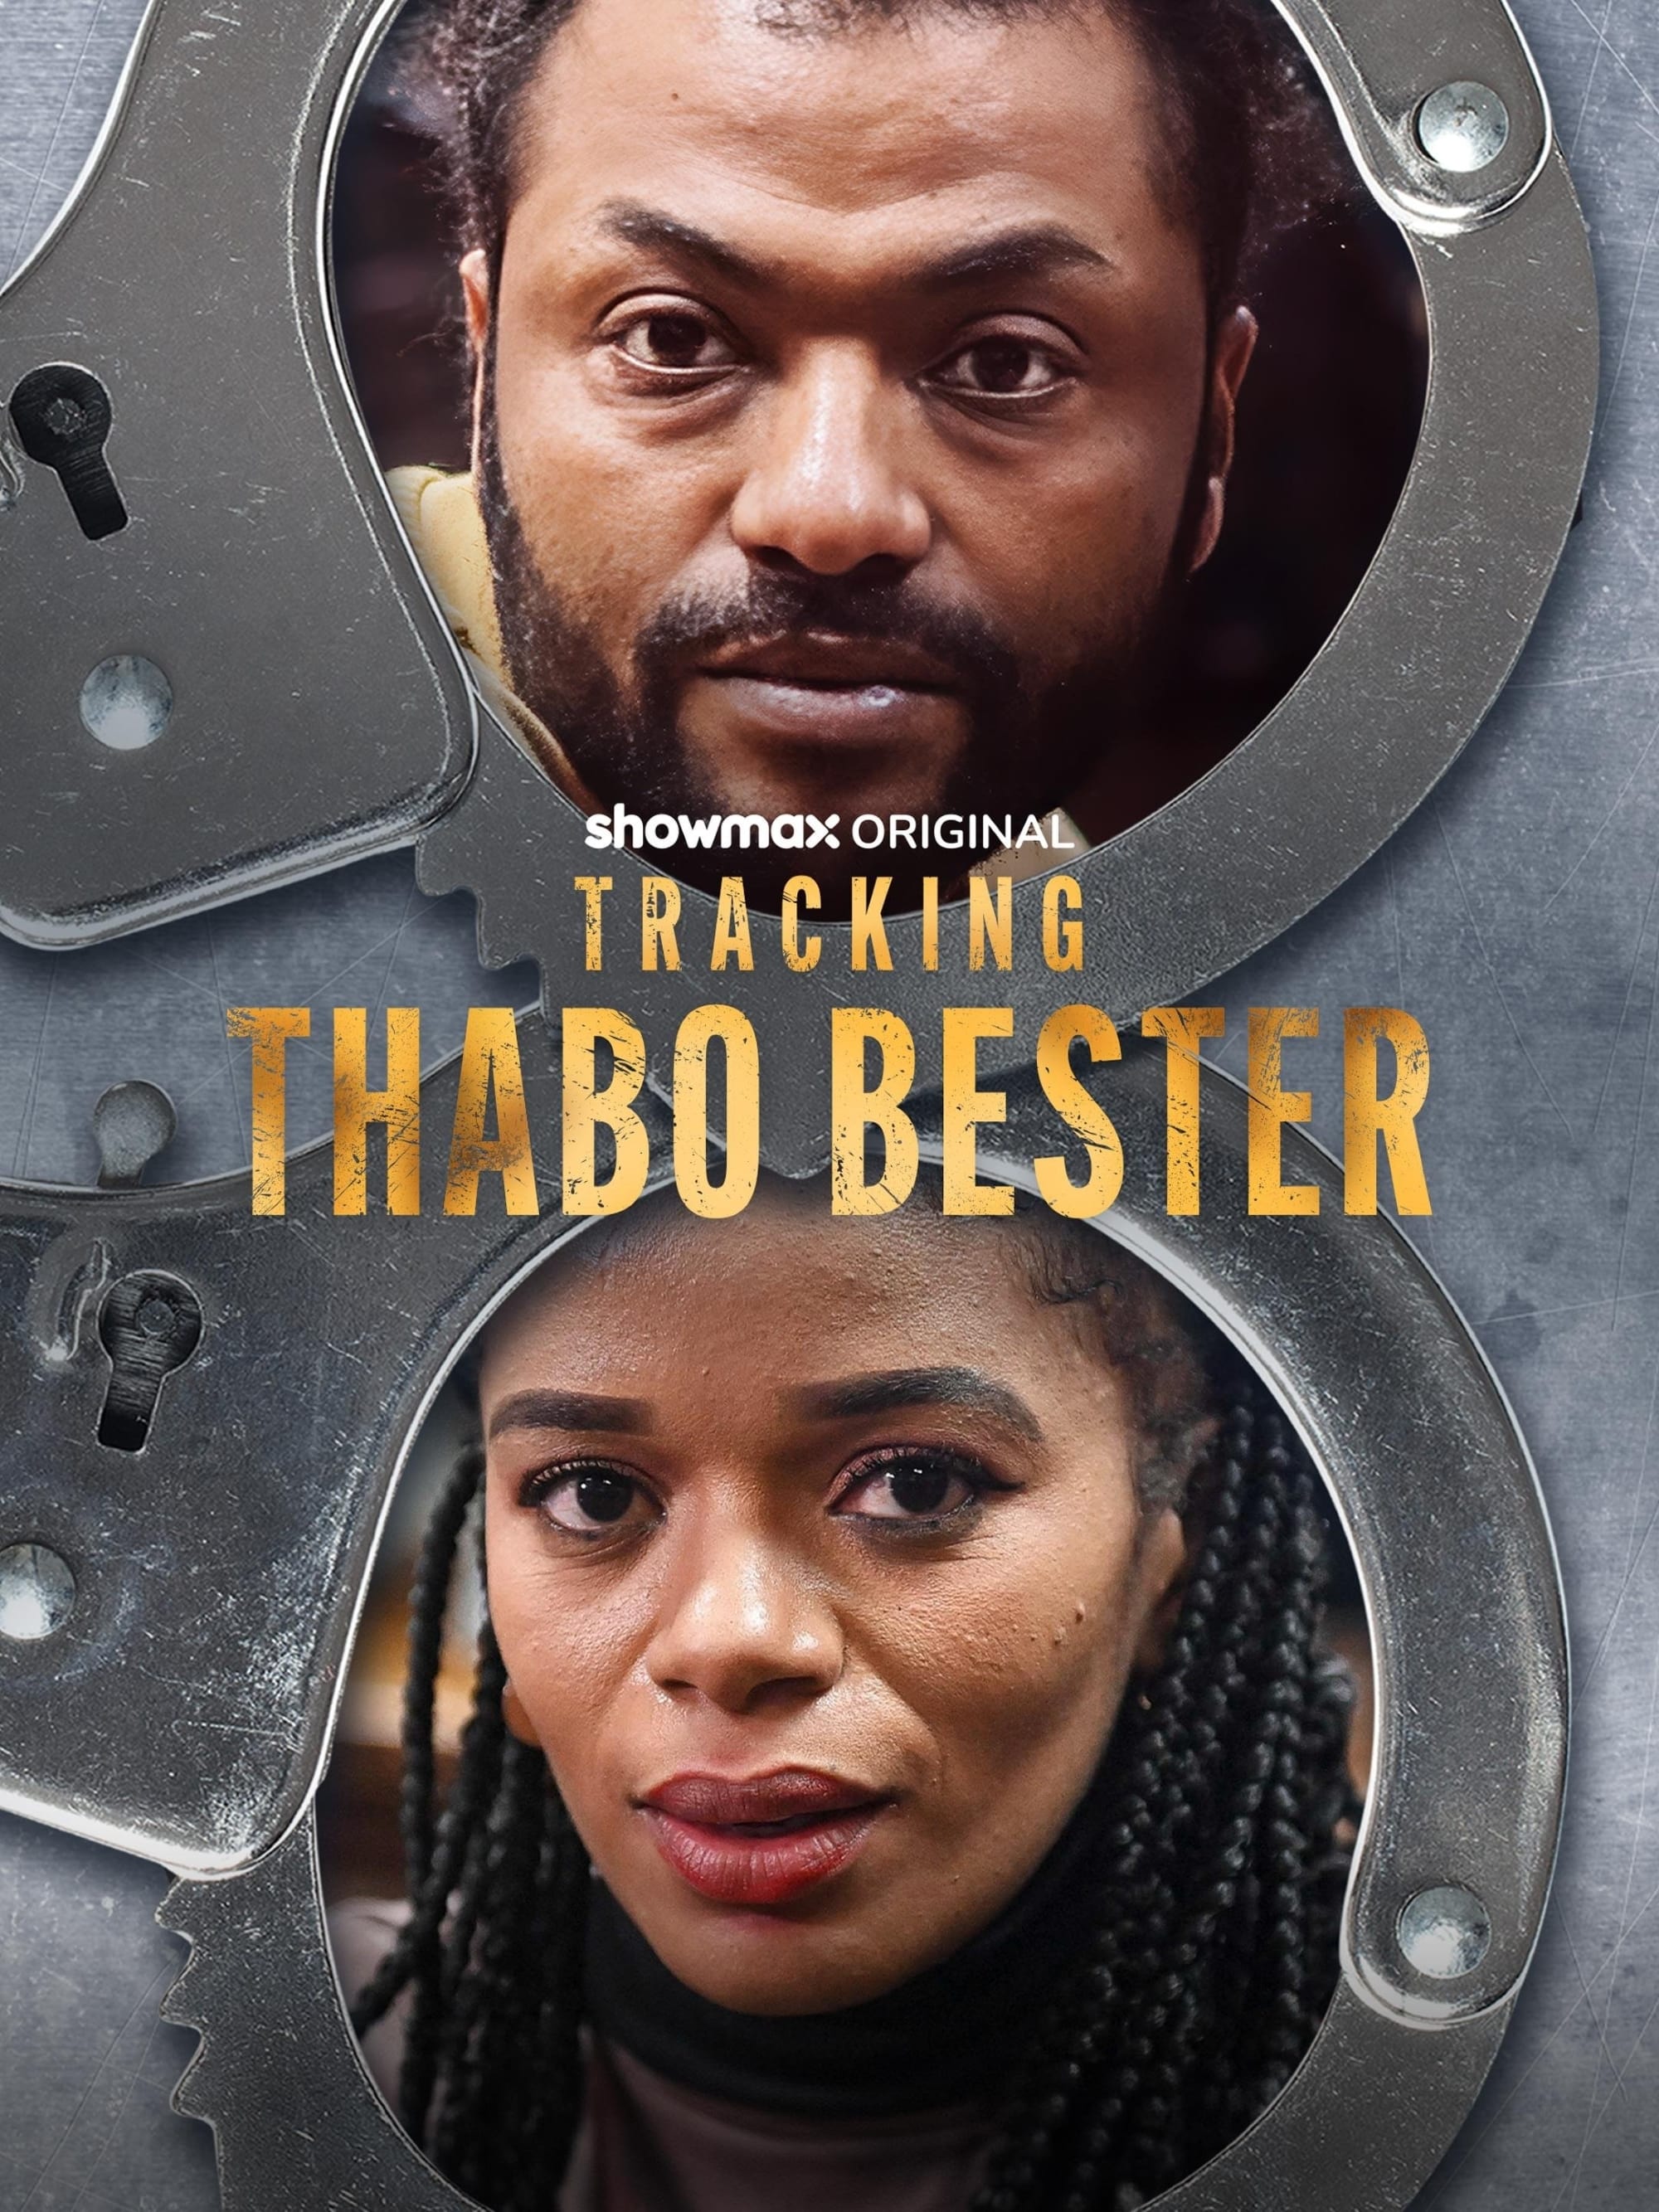 Tracking Thabo Bester